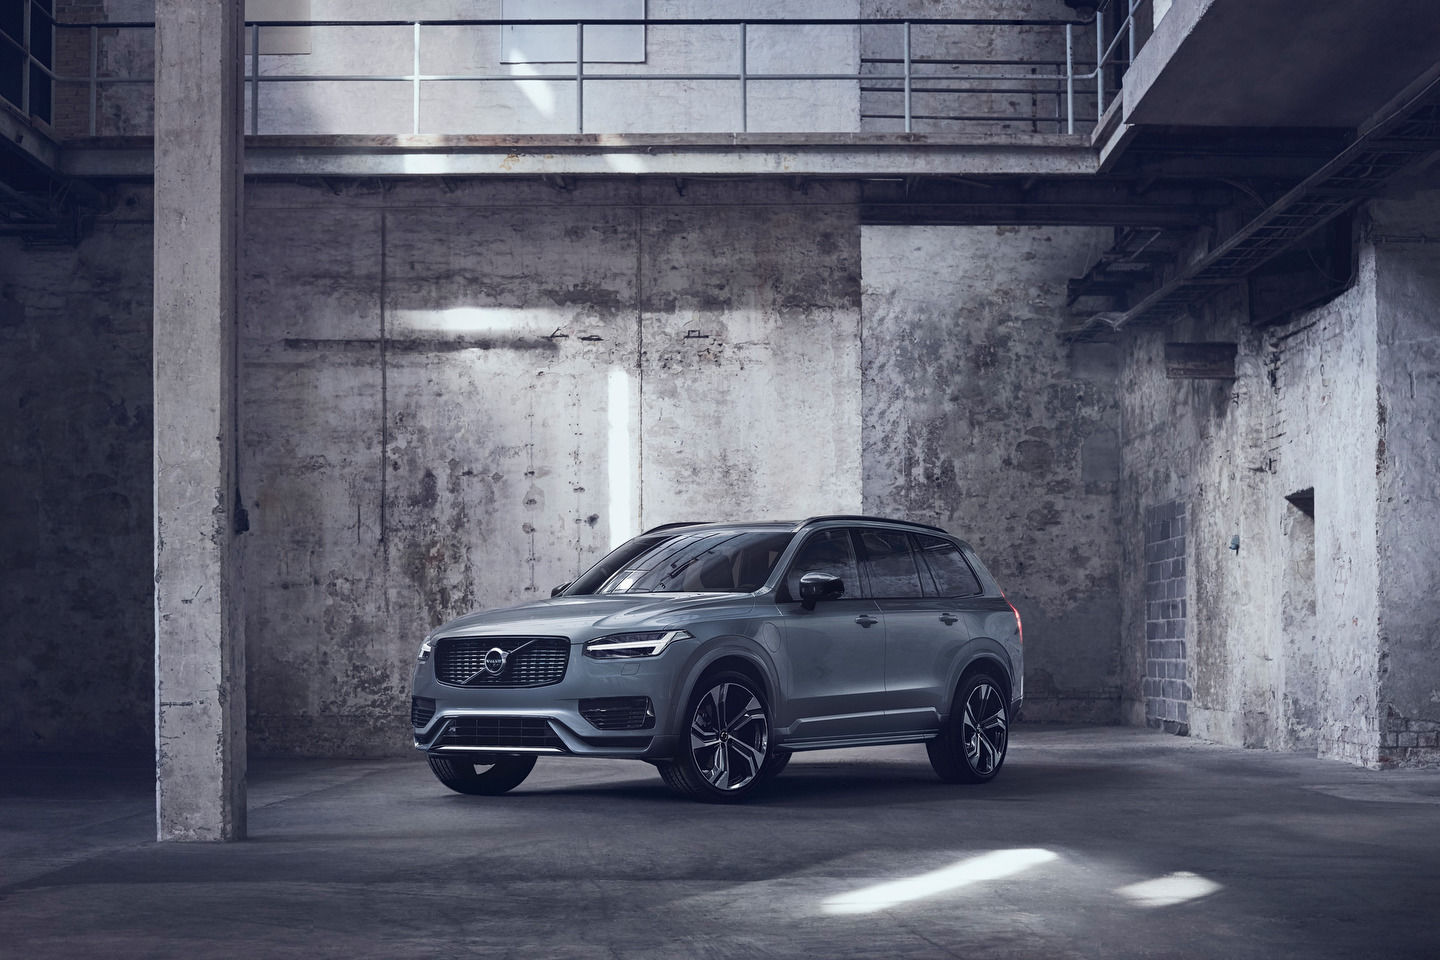 The 2022 Volvo XC90 Recharge has been significantly improved